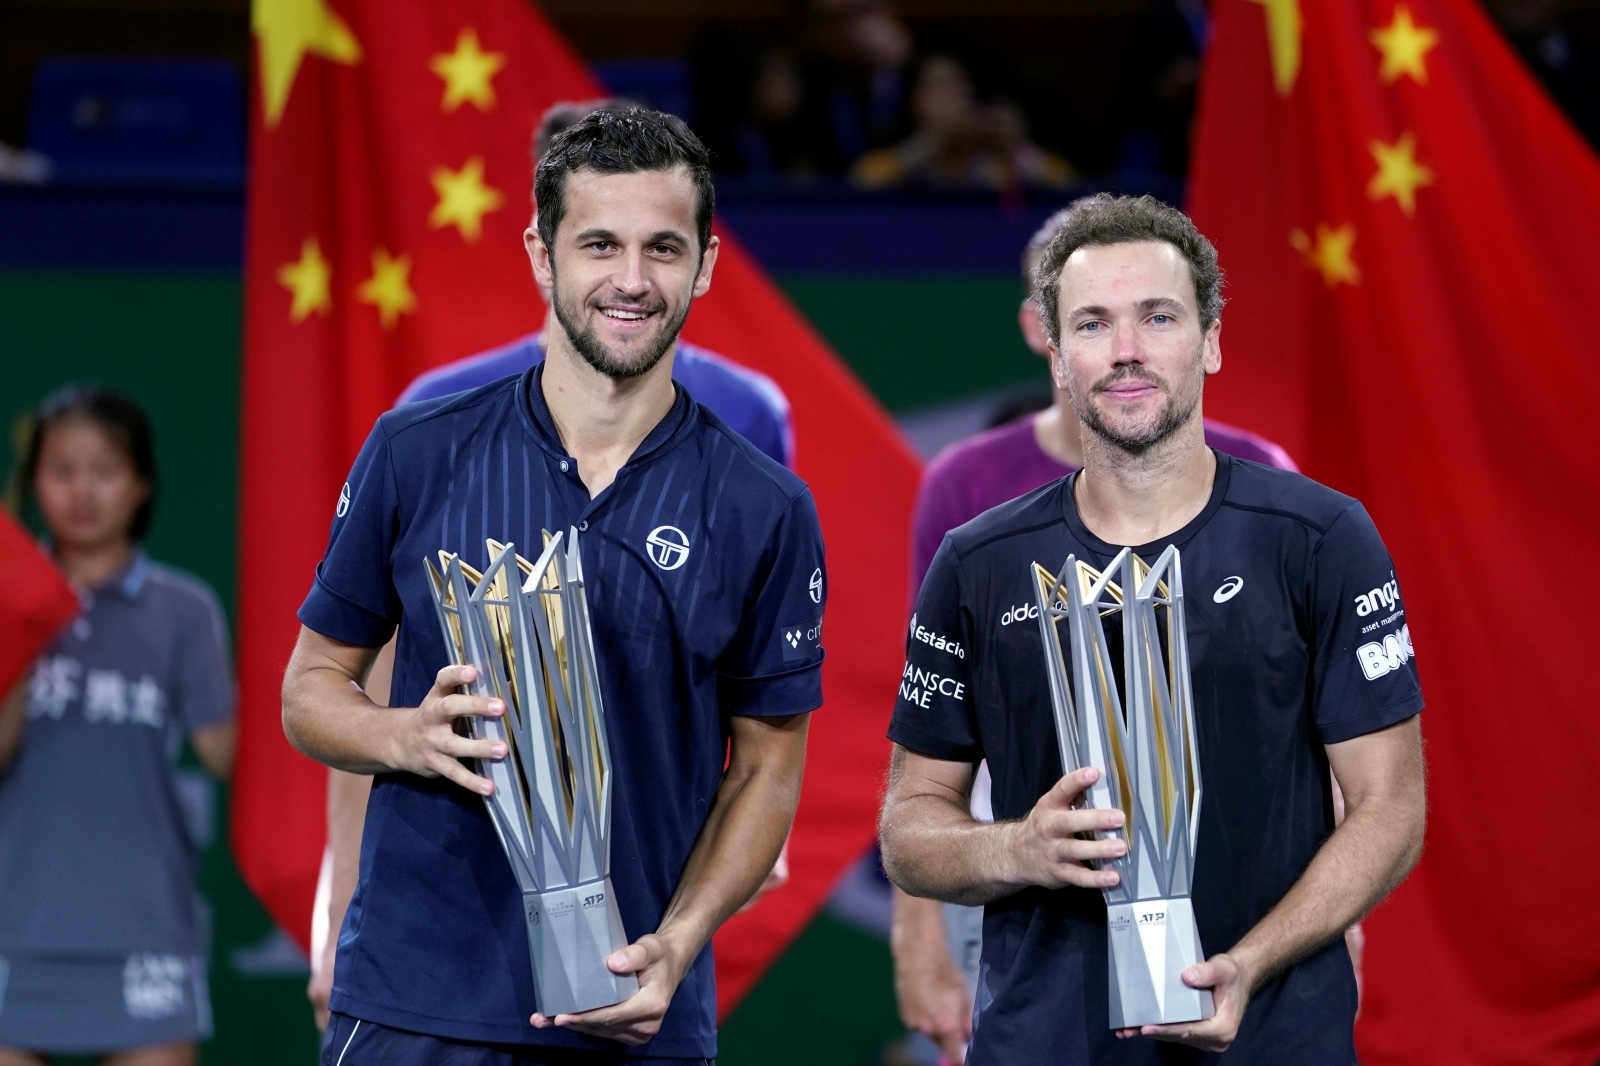 Tennis - Shanghai Masters - Men's Doubles Tennis - Shanghai Masters - Men's Doubles - Shanghai, China - October 13, 2019 - Mate Pavic of Croatia and Bruno Soares of Brazil celebrate with trophies after winning the final against Lukasz Kubot of Poland and Marcelo Melo of Brazil in the men's doubles final match. REUTERS/Aly Song ALY SONG